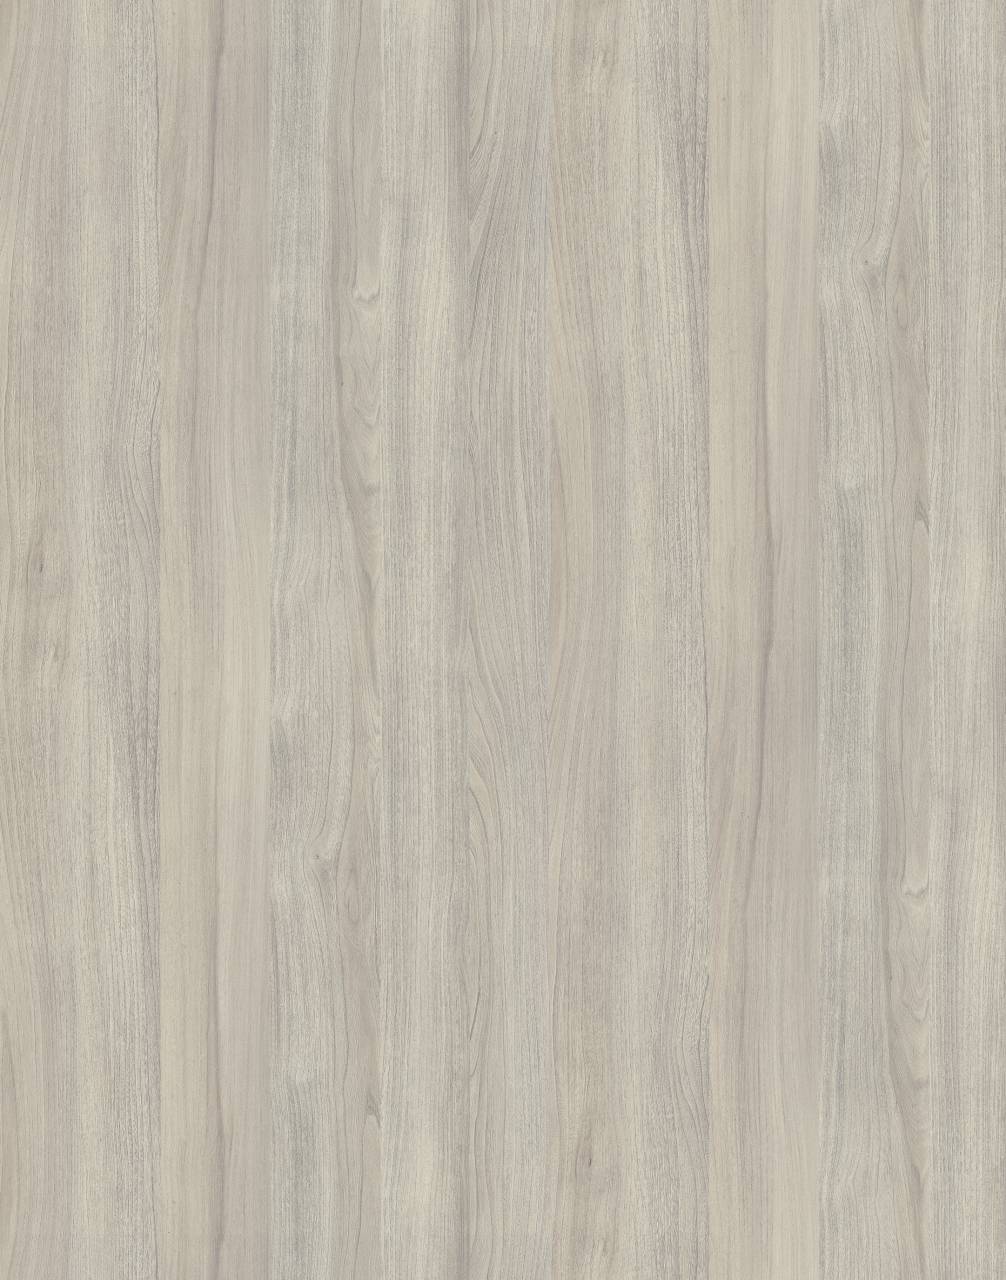 Silver Liberty Elm PW HPL with textured surface and cool grey tones for a contemporary and versatile look.